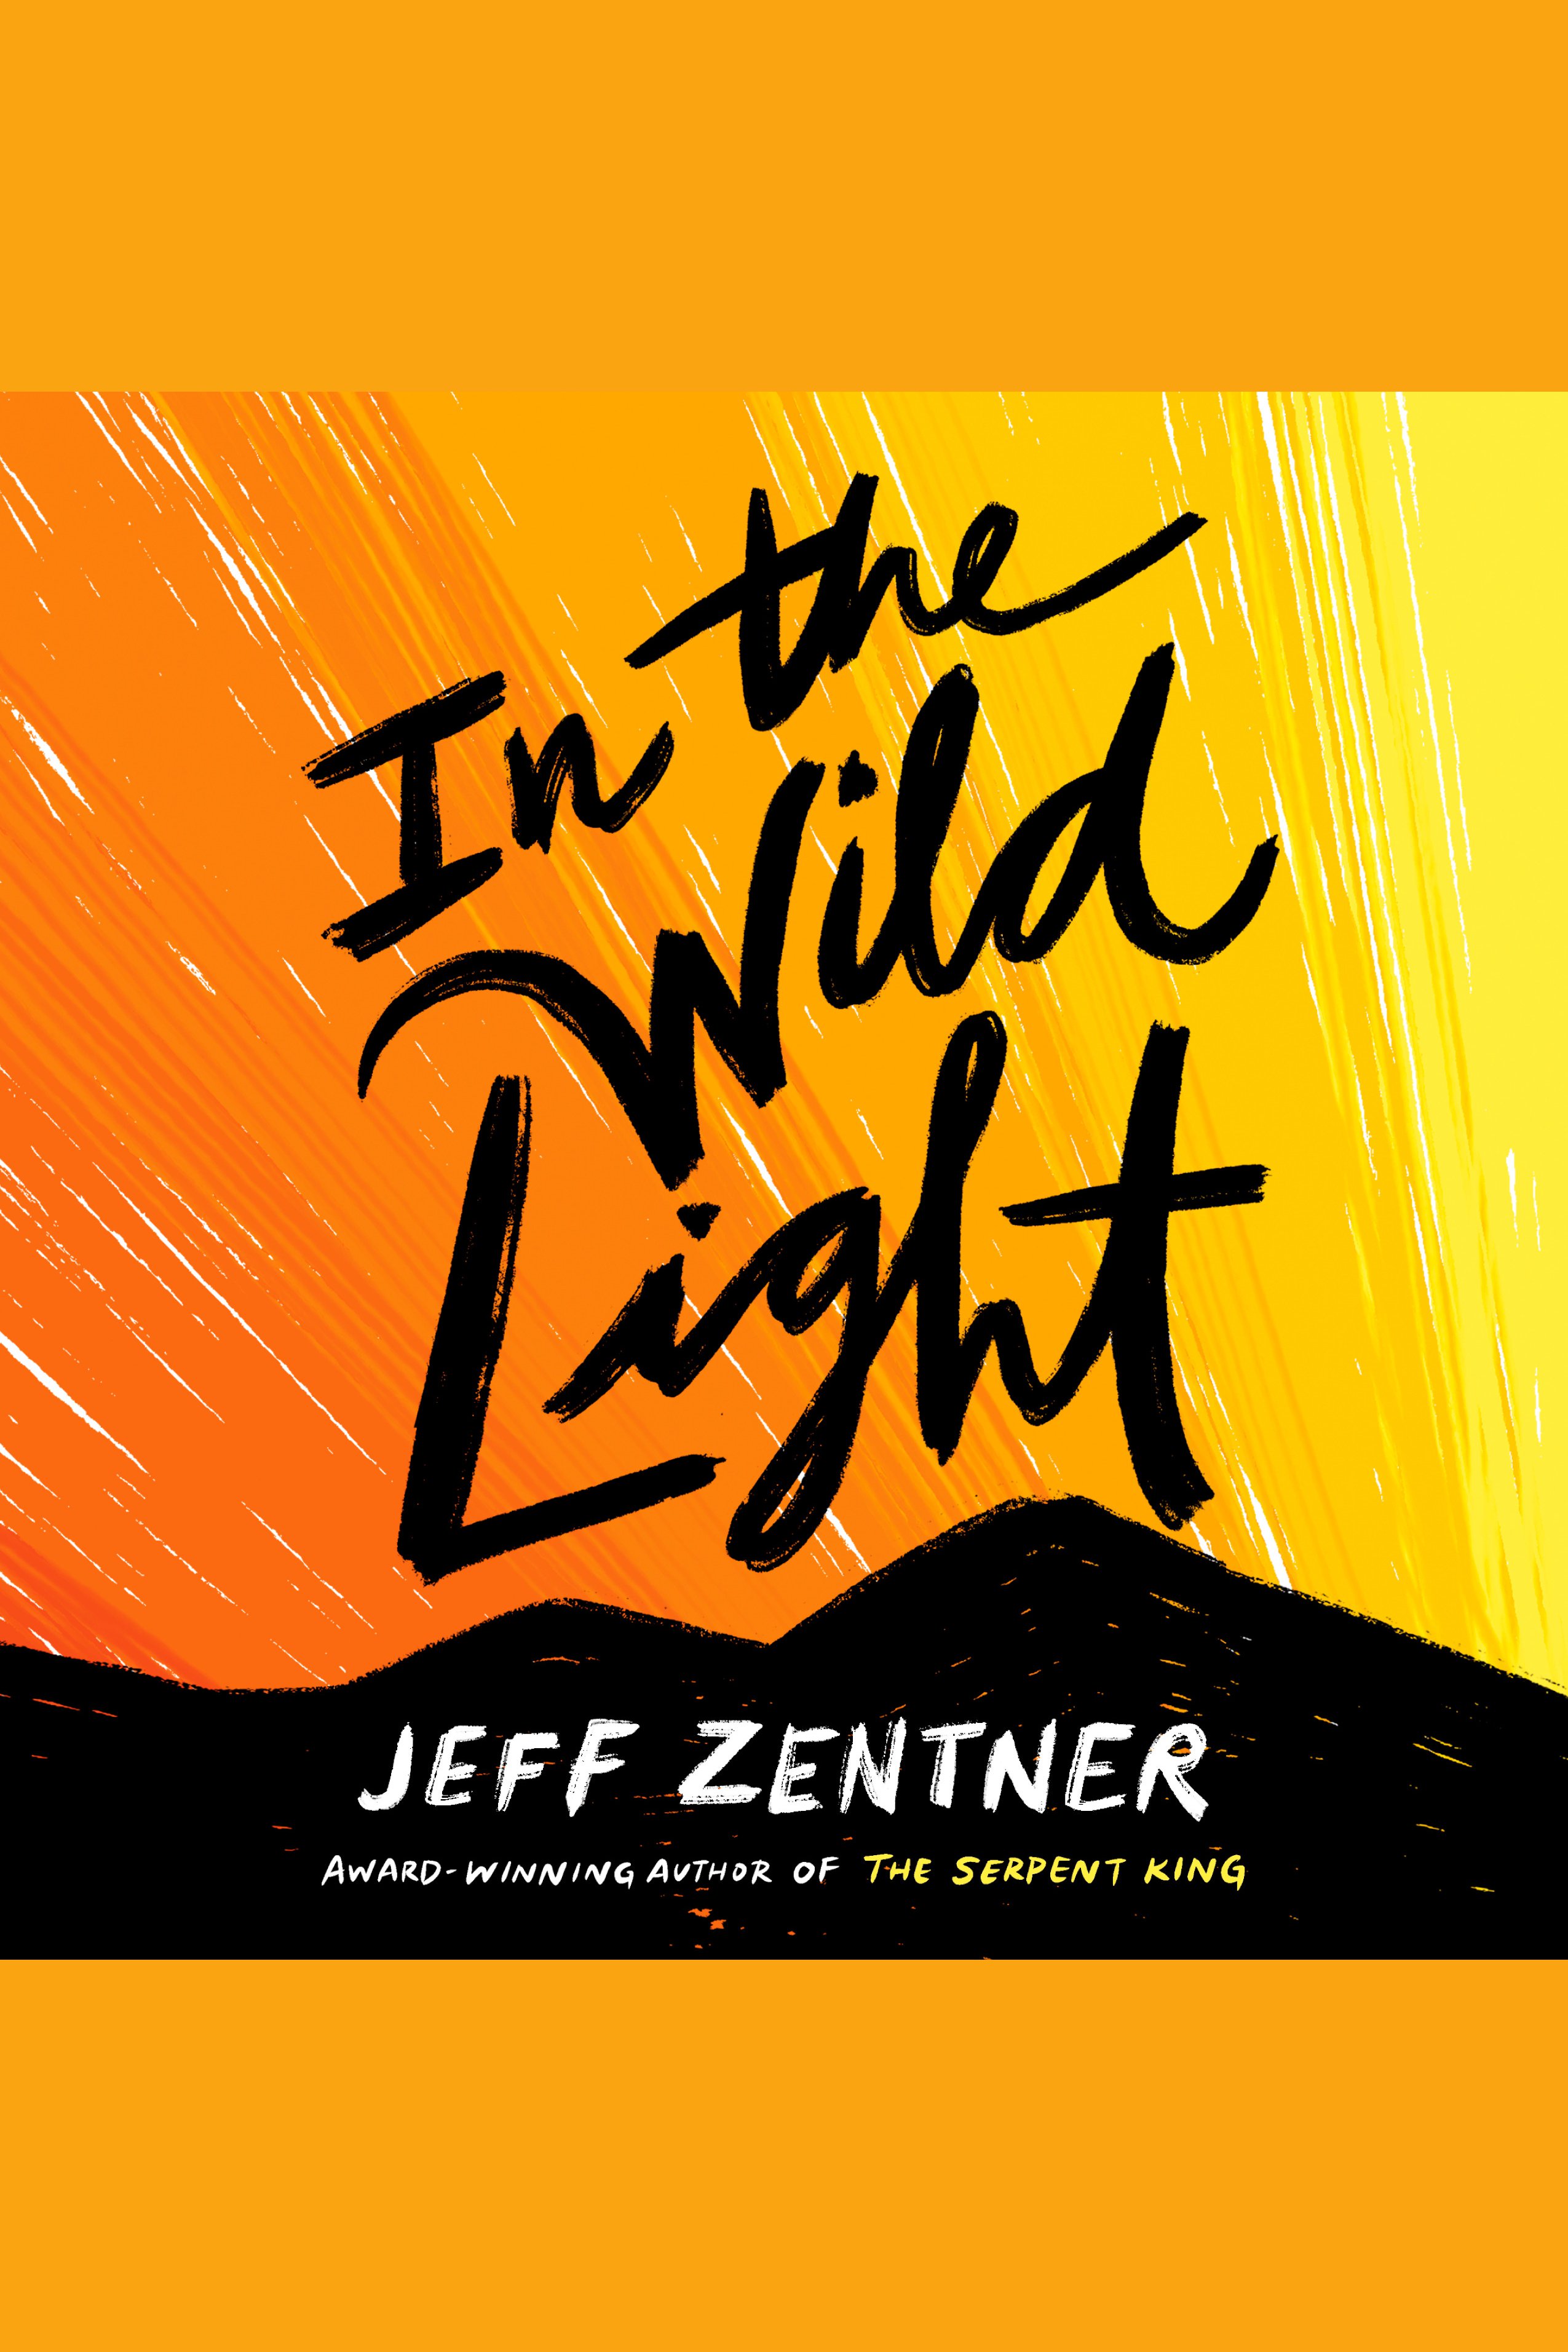 In the Wild Light cover image